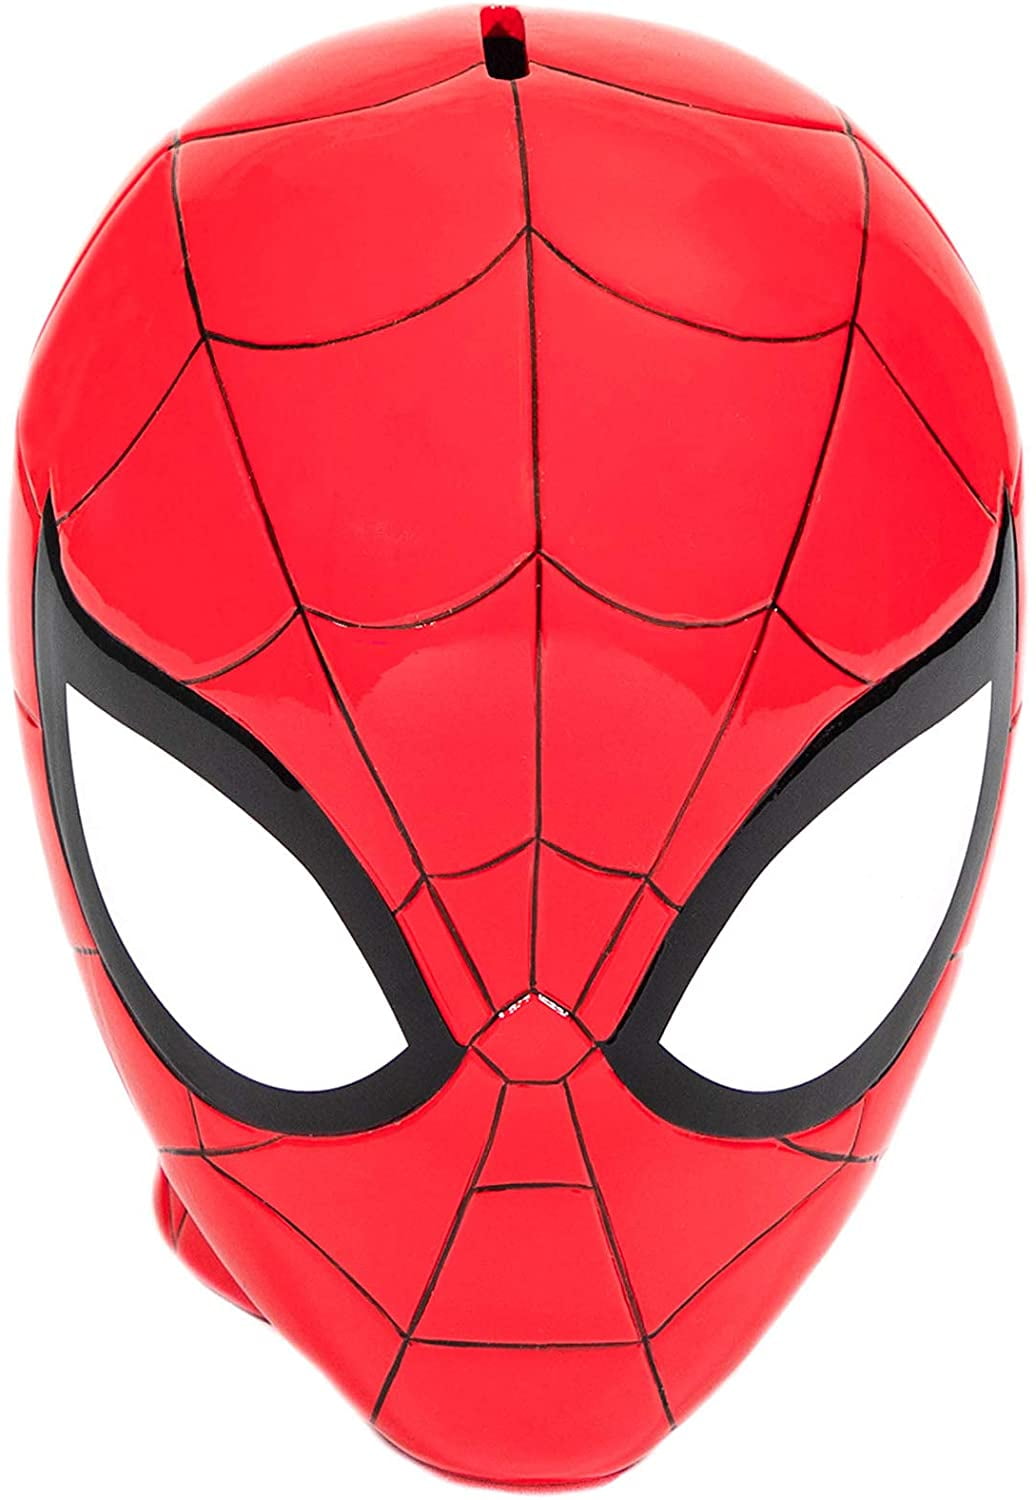 Spider Man Marvel Comics Coin Bank Bust New ages 4+ 